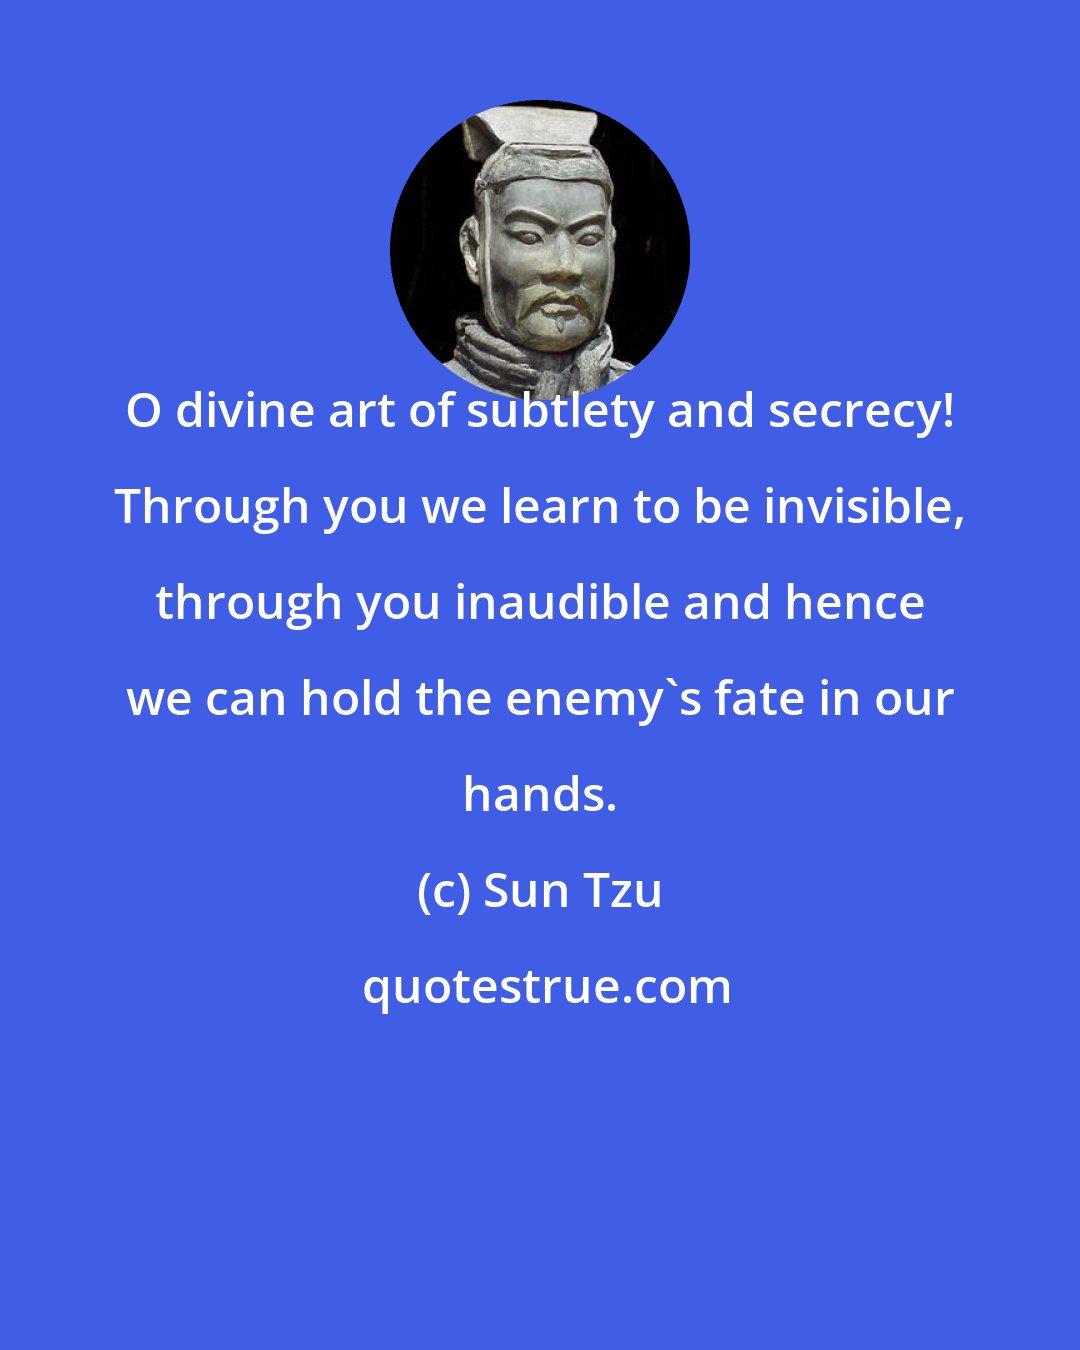 Sun Tzu: O divine art of subtlety and secrecy! Through you we learn to be invisible, through you inaudible and hence we can hold the enemy's fate in our hands.